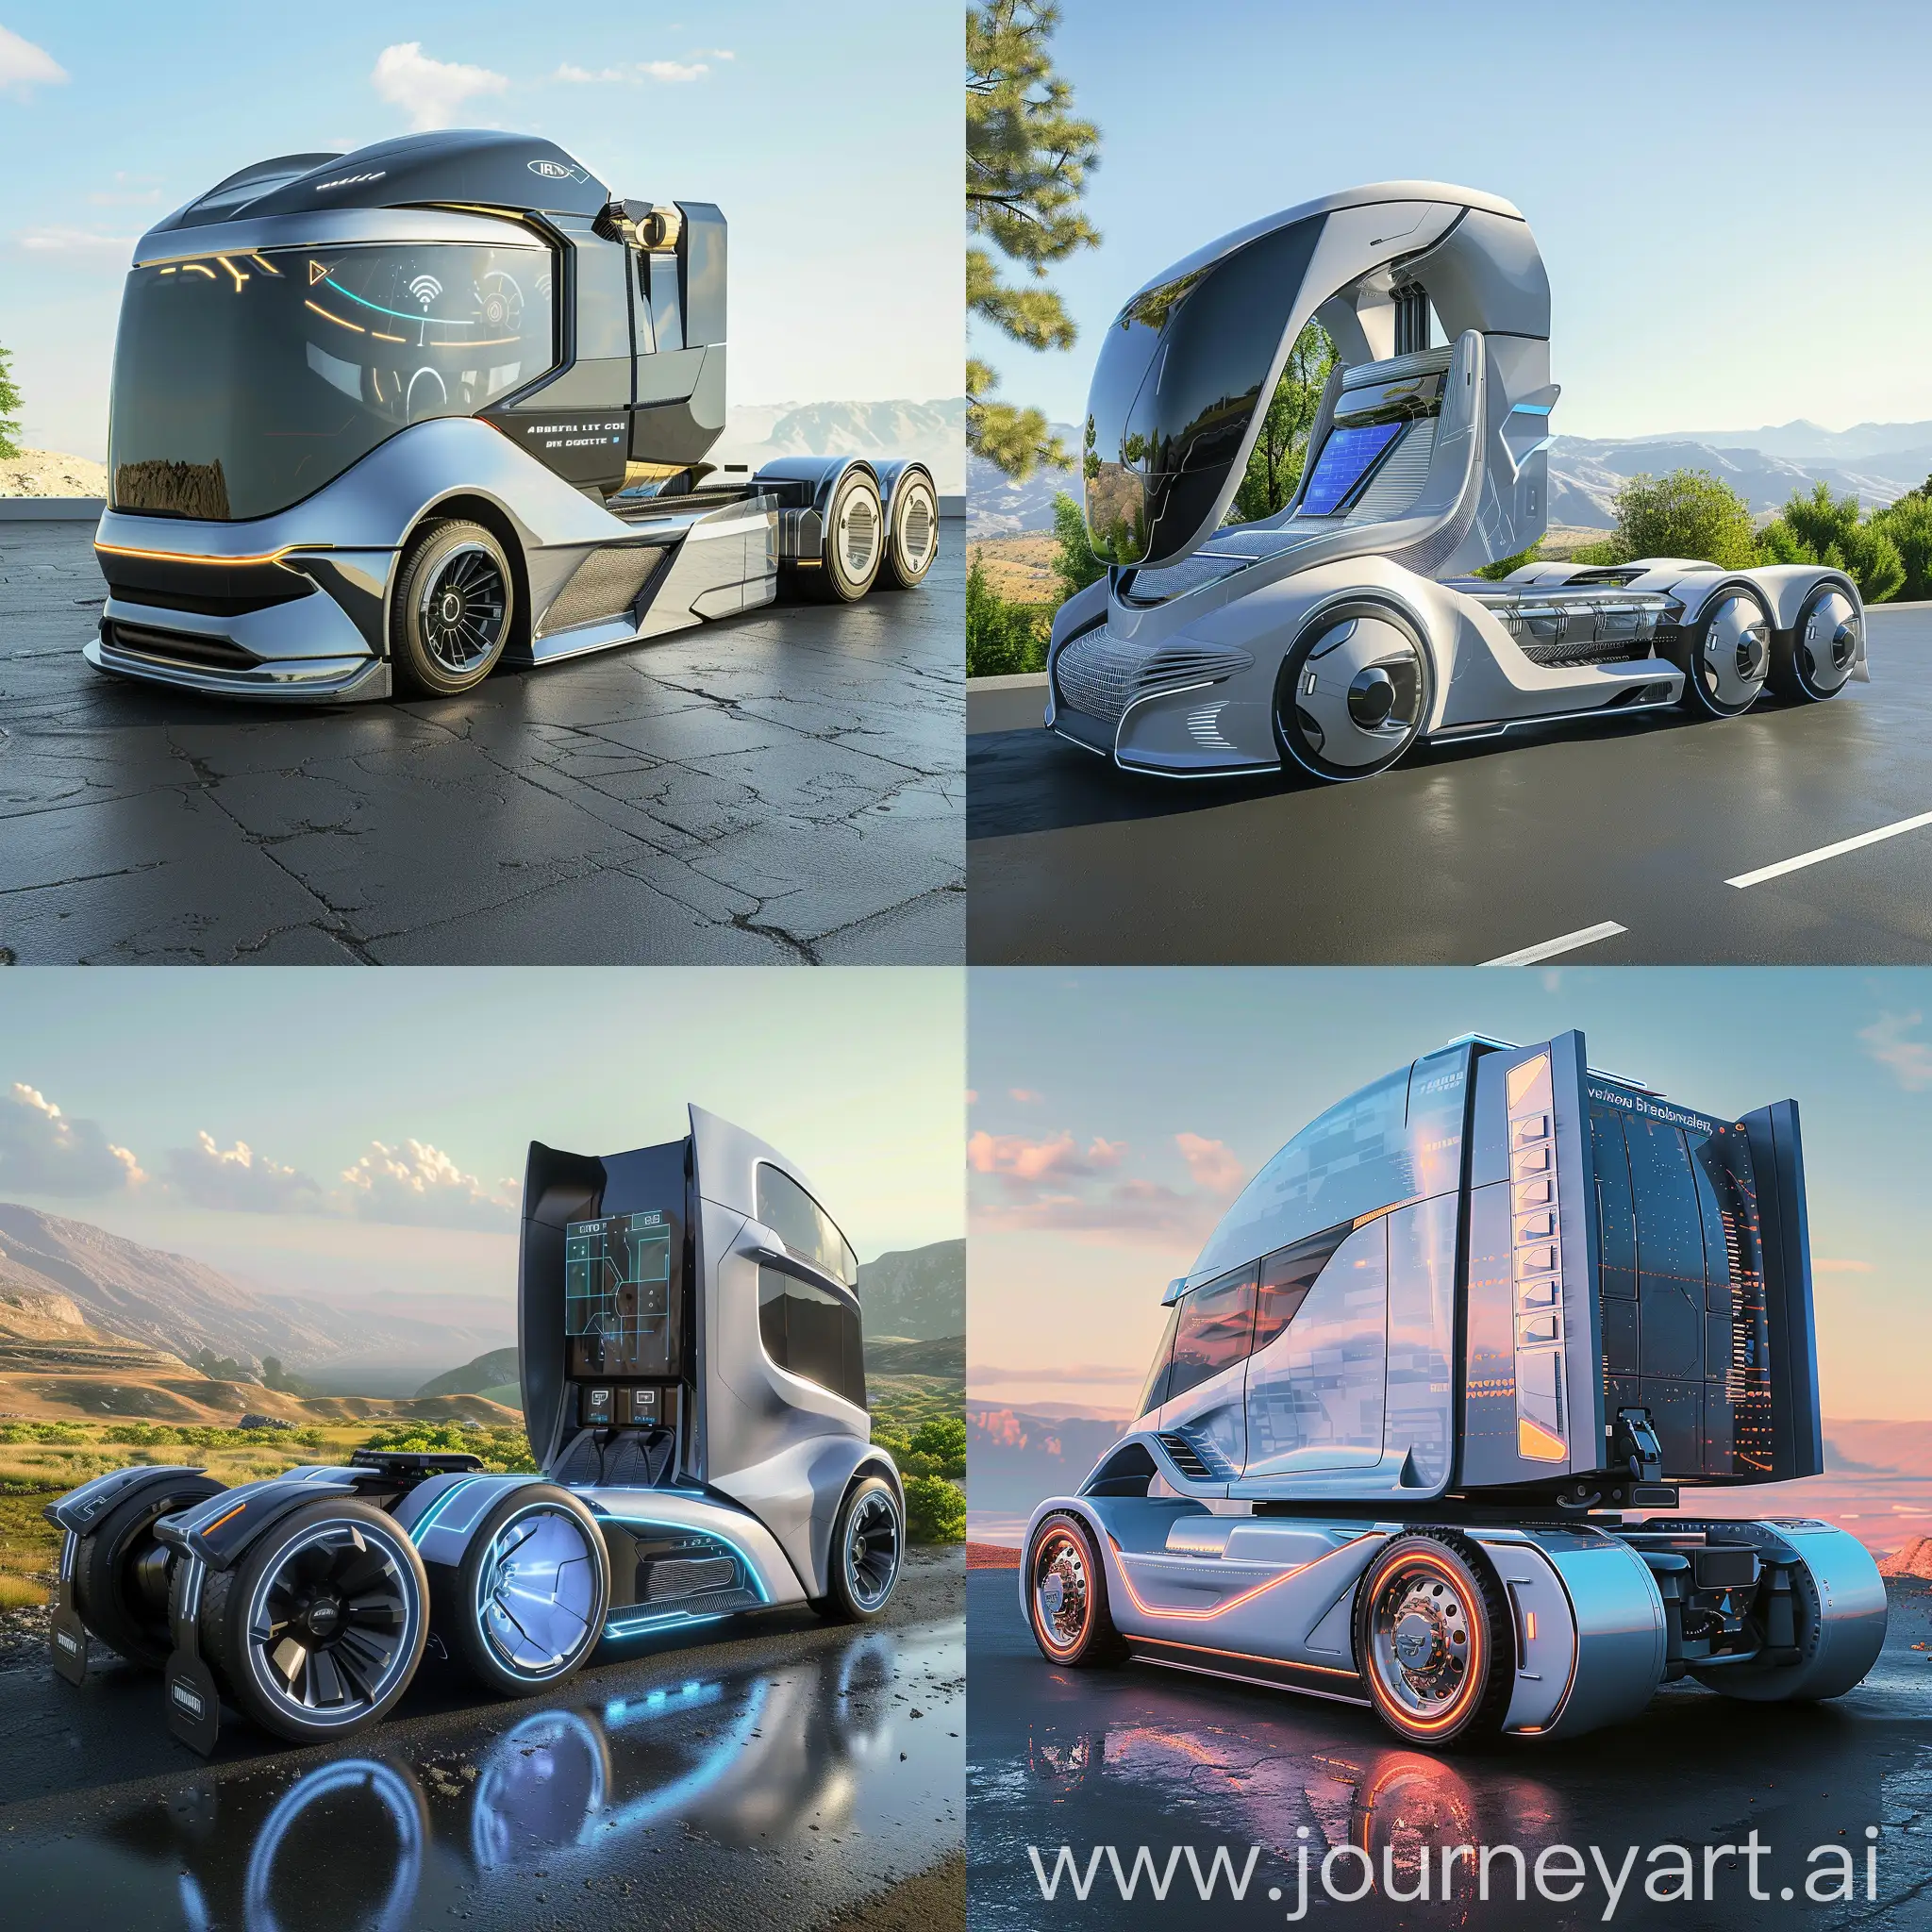 Futuristic truck, in futuristic style, Autonomous Driving Systems, Electric Powertrain, Integrated Connectivity, Advanced Driver Assistance Systems (ADAS), Smart Cabin Design, Augmented Reality Displays, Predictive Maintenance Systems, Energy Recapture Systems, Advanced Materials, Cybersecurity Measures, Vehicle-to-Everything (V2X) Communication, Advanced Aerodynamics, Telescopic Trailer Hitch, Augmented Reality Exterior Displays, Solar Panels, Dynamic Lighting Systems, Active Suspension Systems, Remote Control and Monitoring, Advanced Collision Avoidance Systems, Integrated Cargo Management Systems, Carbon Fiber Components, Aluminum Alloy Engine Blocks, Advanced Lightweight Seat Materials, Plastic Composite Cabin Interiors, Thin-Film Solar Roof, Hollow-Core Components, Foam Core Insulation, Magnesium Alloy Wheels, Thin-Film Display Technology, Advanced Lightweight Fasteners, Carbon Fiber Body Panels, Aluminum Alloy Frame, Composite Trailer Construction, Aerodynamic Fairings and Skirts, Retractable Wind Deflectors, Lightweight Suspension Components, Carbon Fiber Reinforced Wheels, Integrated Solar Panels, Thin-Film Coatings, Advanced LED Lighting, unreal engine --stylize 1000